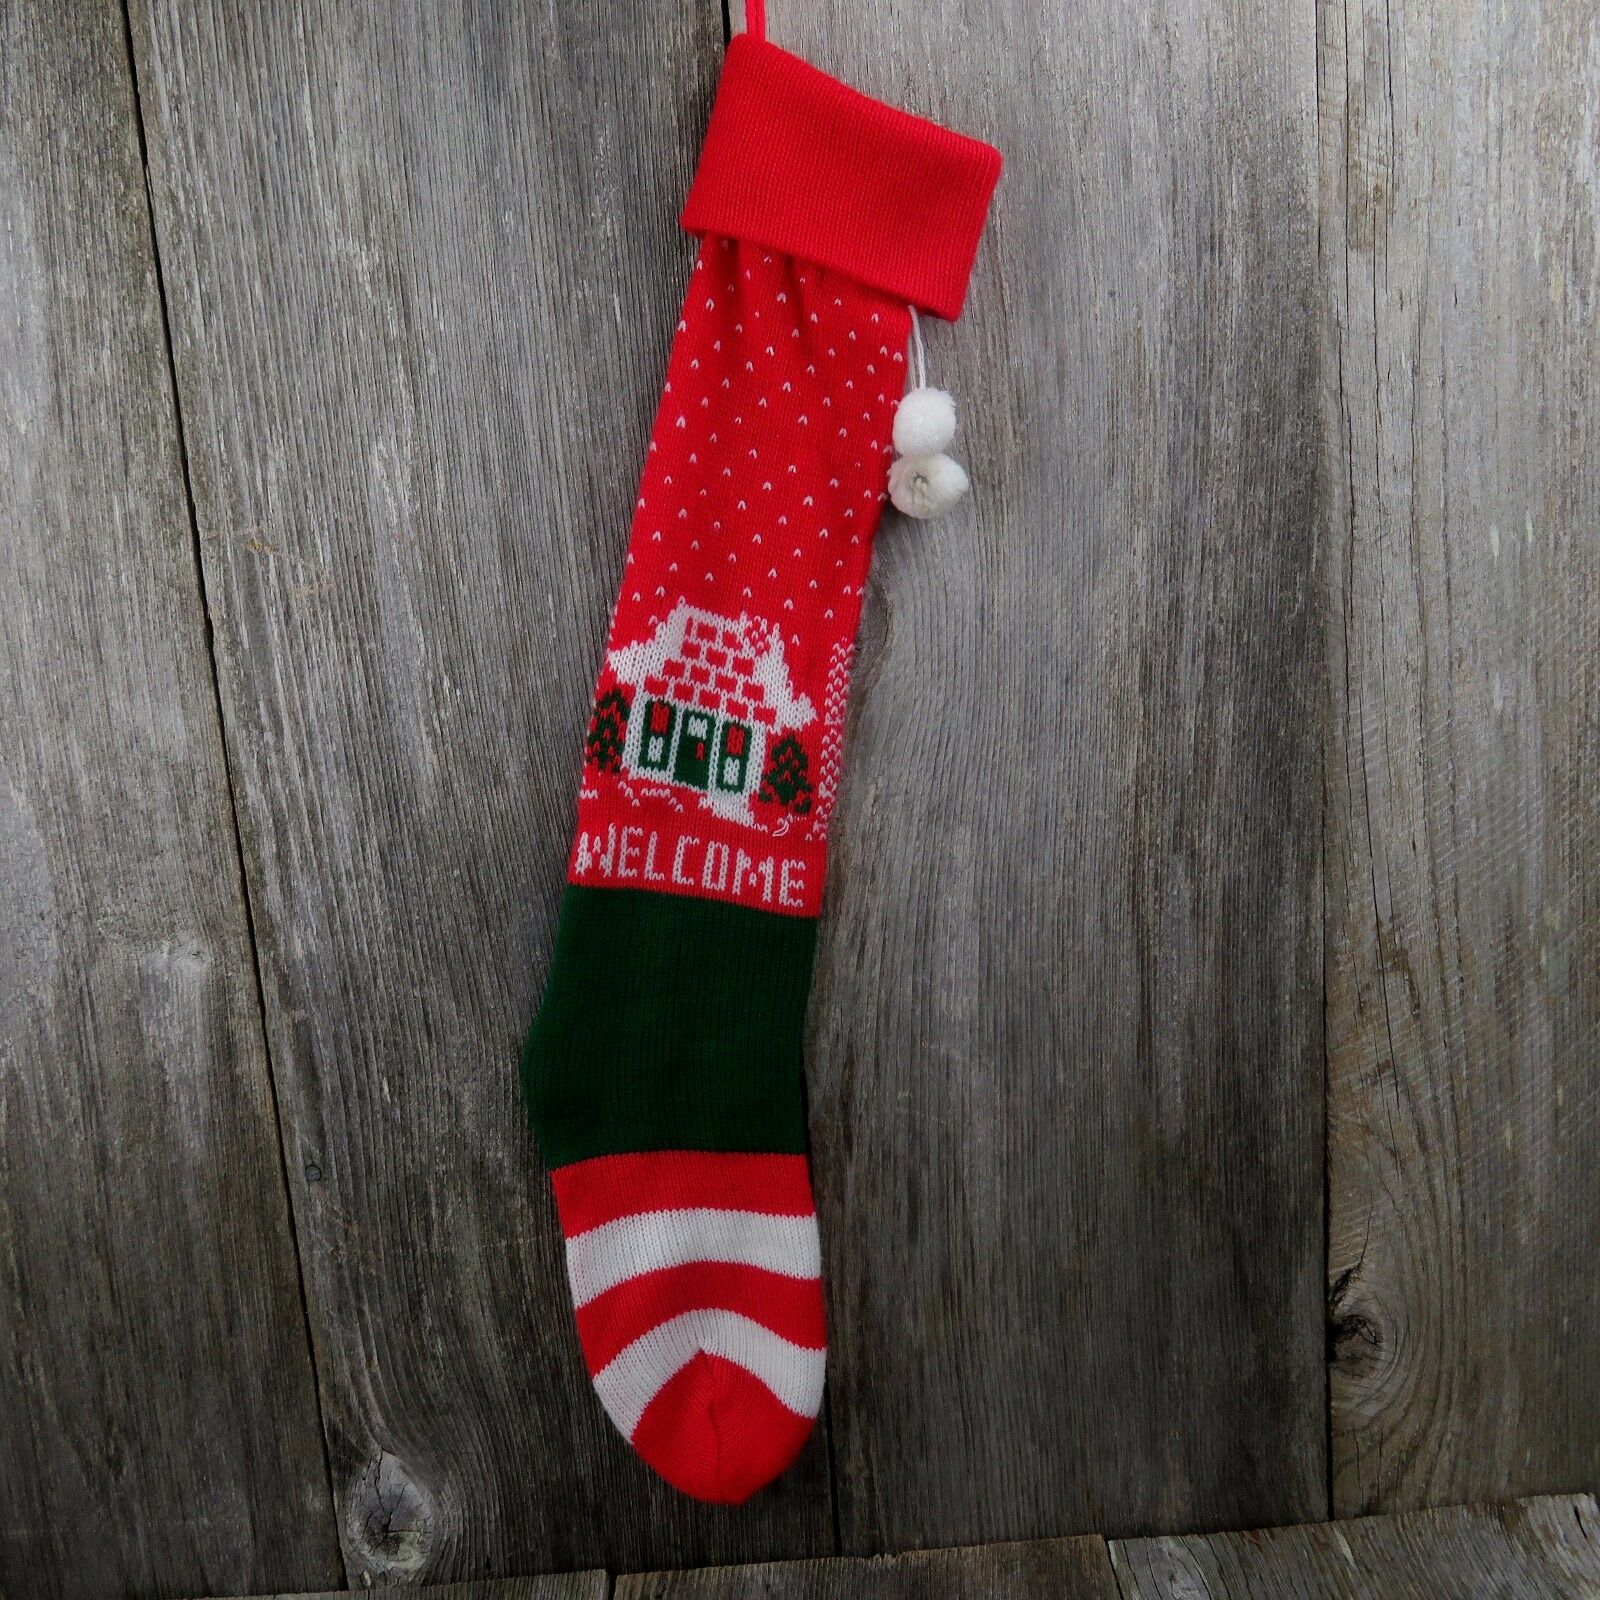 Vintage New House Stocking Knit Welcome Home Knitted Red Green 1980s - At Grandma's Table